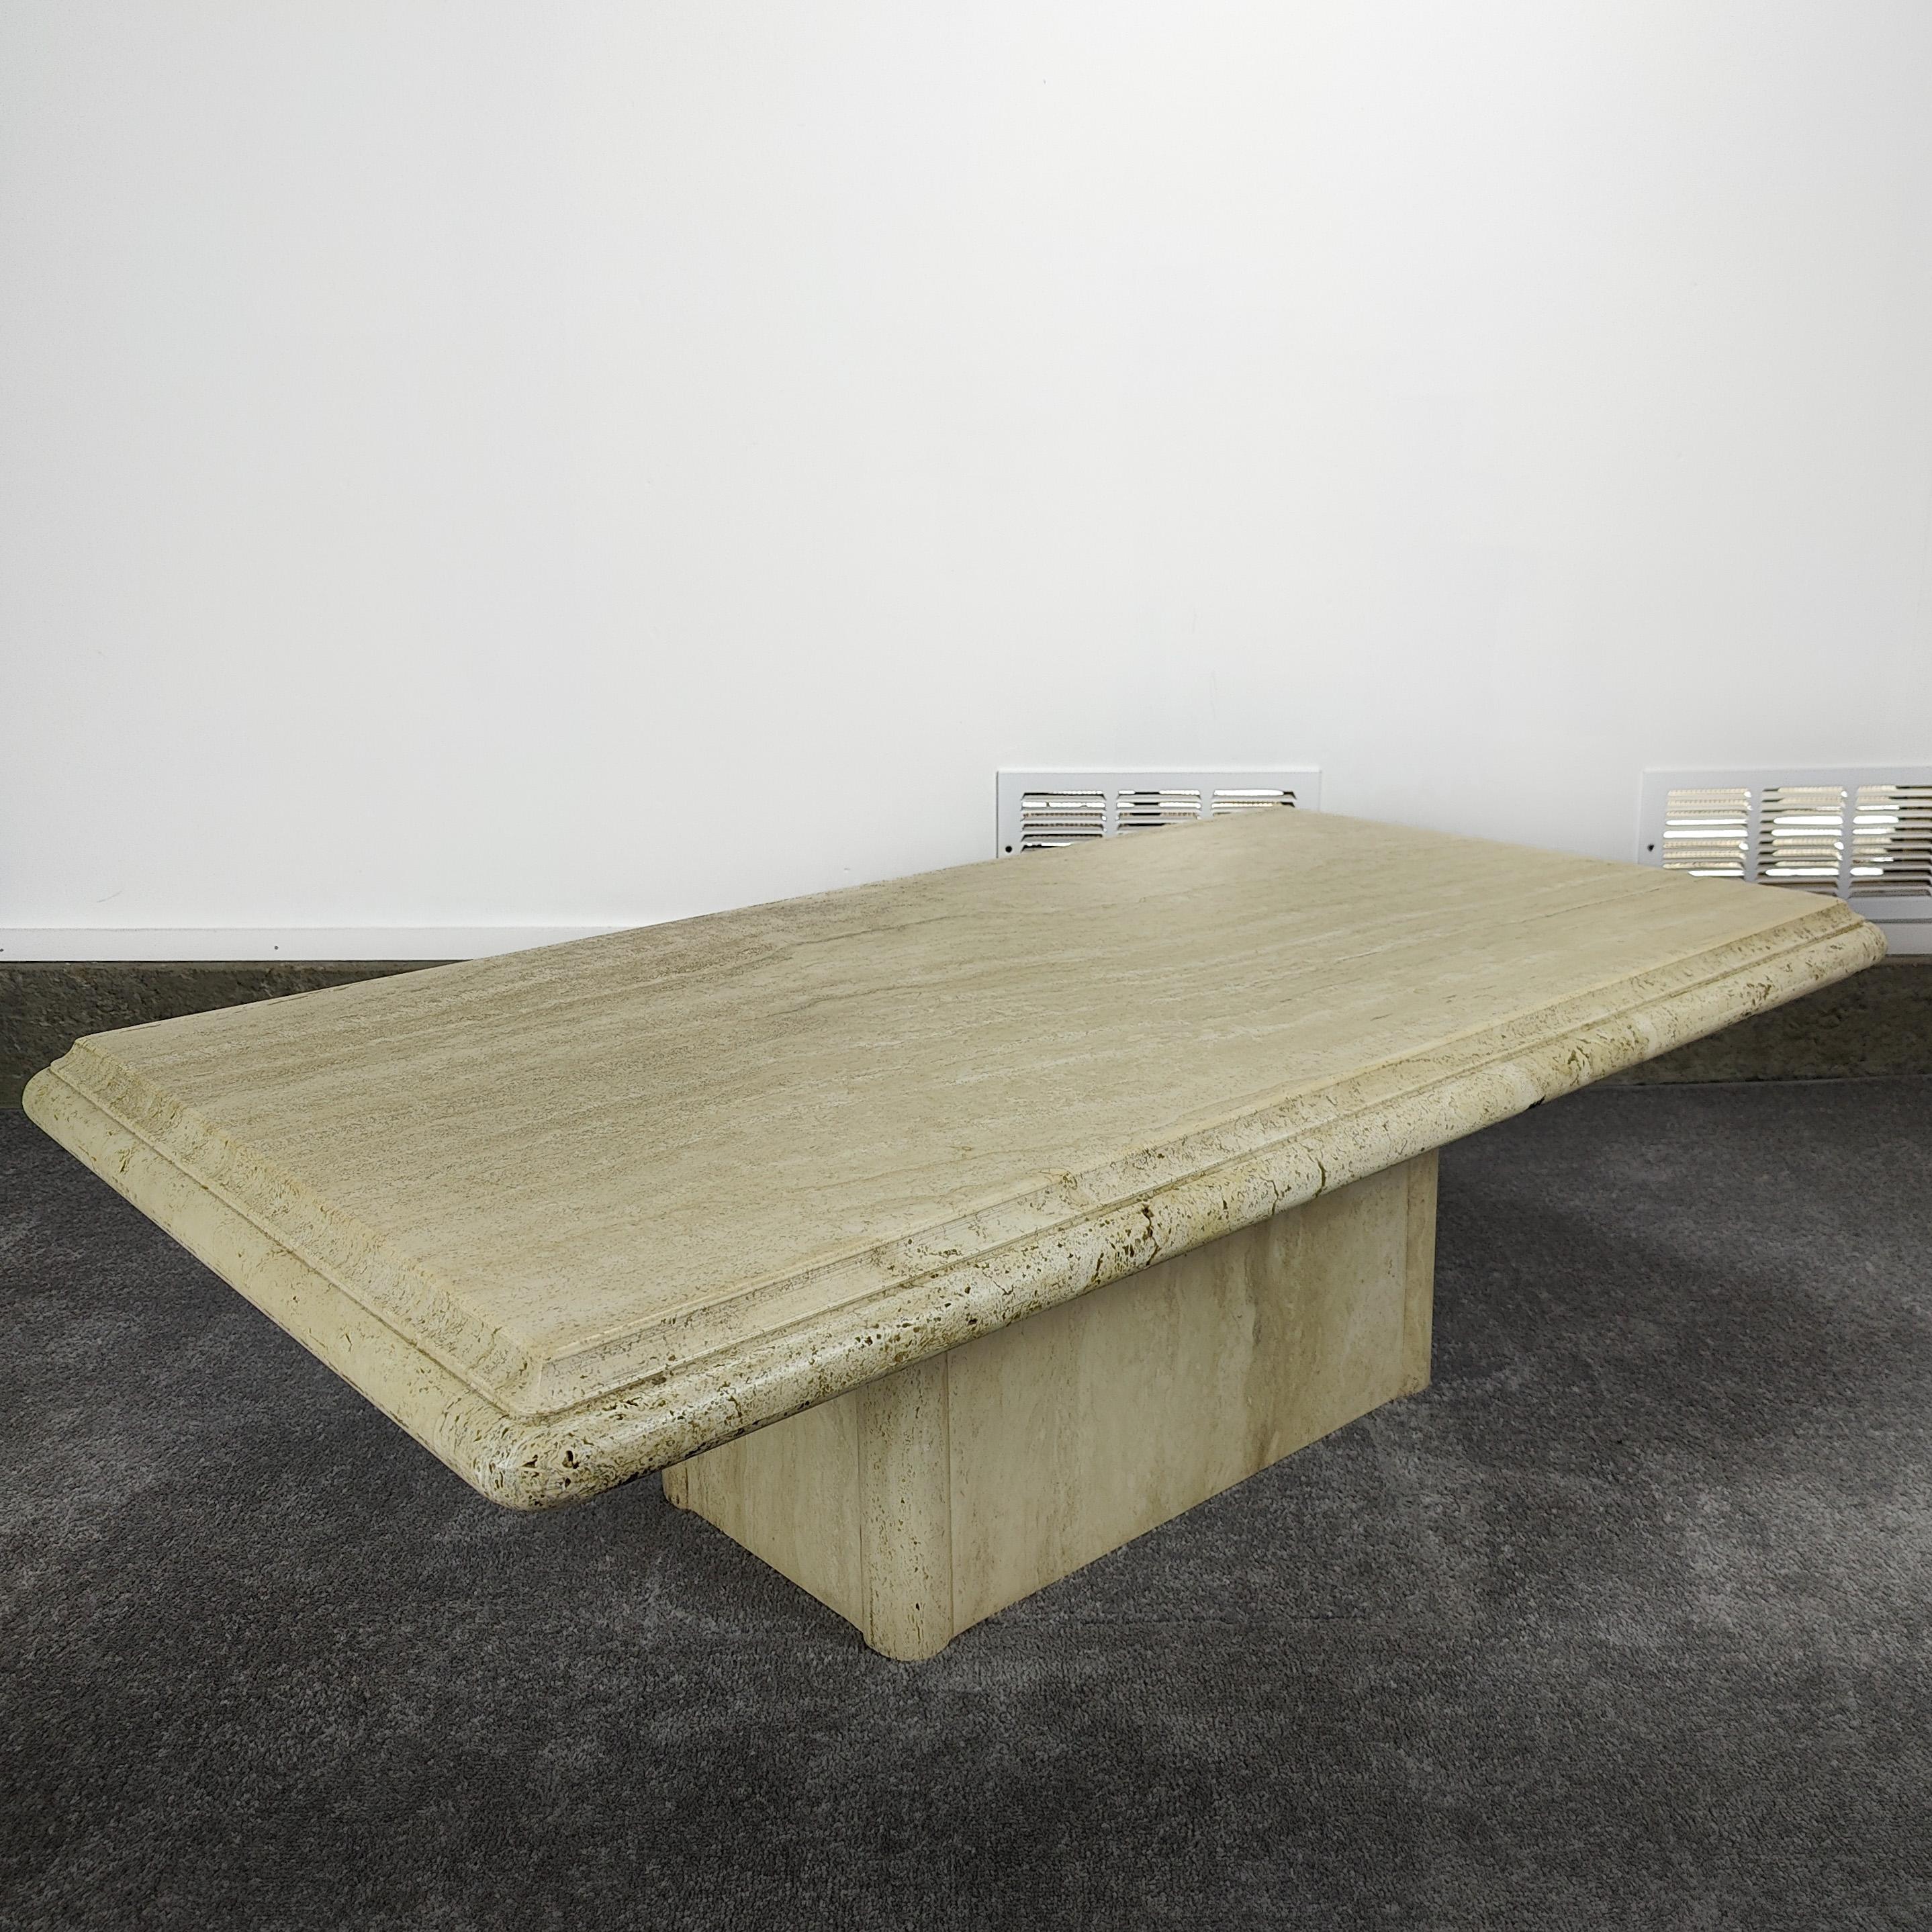 Postmodern 80s Travertine coffee table. Lovely neutral tone with a porous finish. Excellent condition. 50.5w x 28w x 16h. Perfect for that nuetral tones and minimalistic style that were currently experiencing.

If you have any questions, please